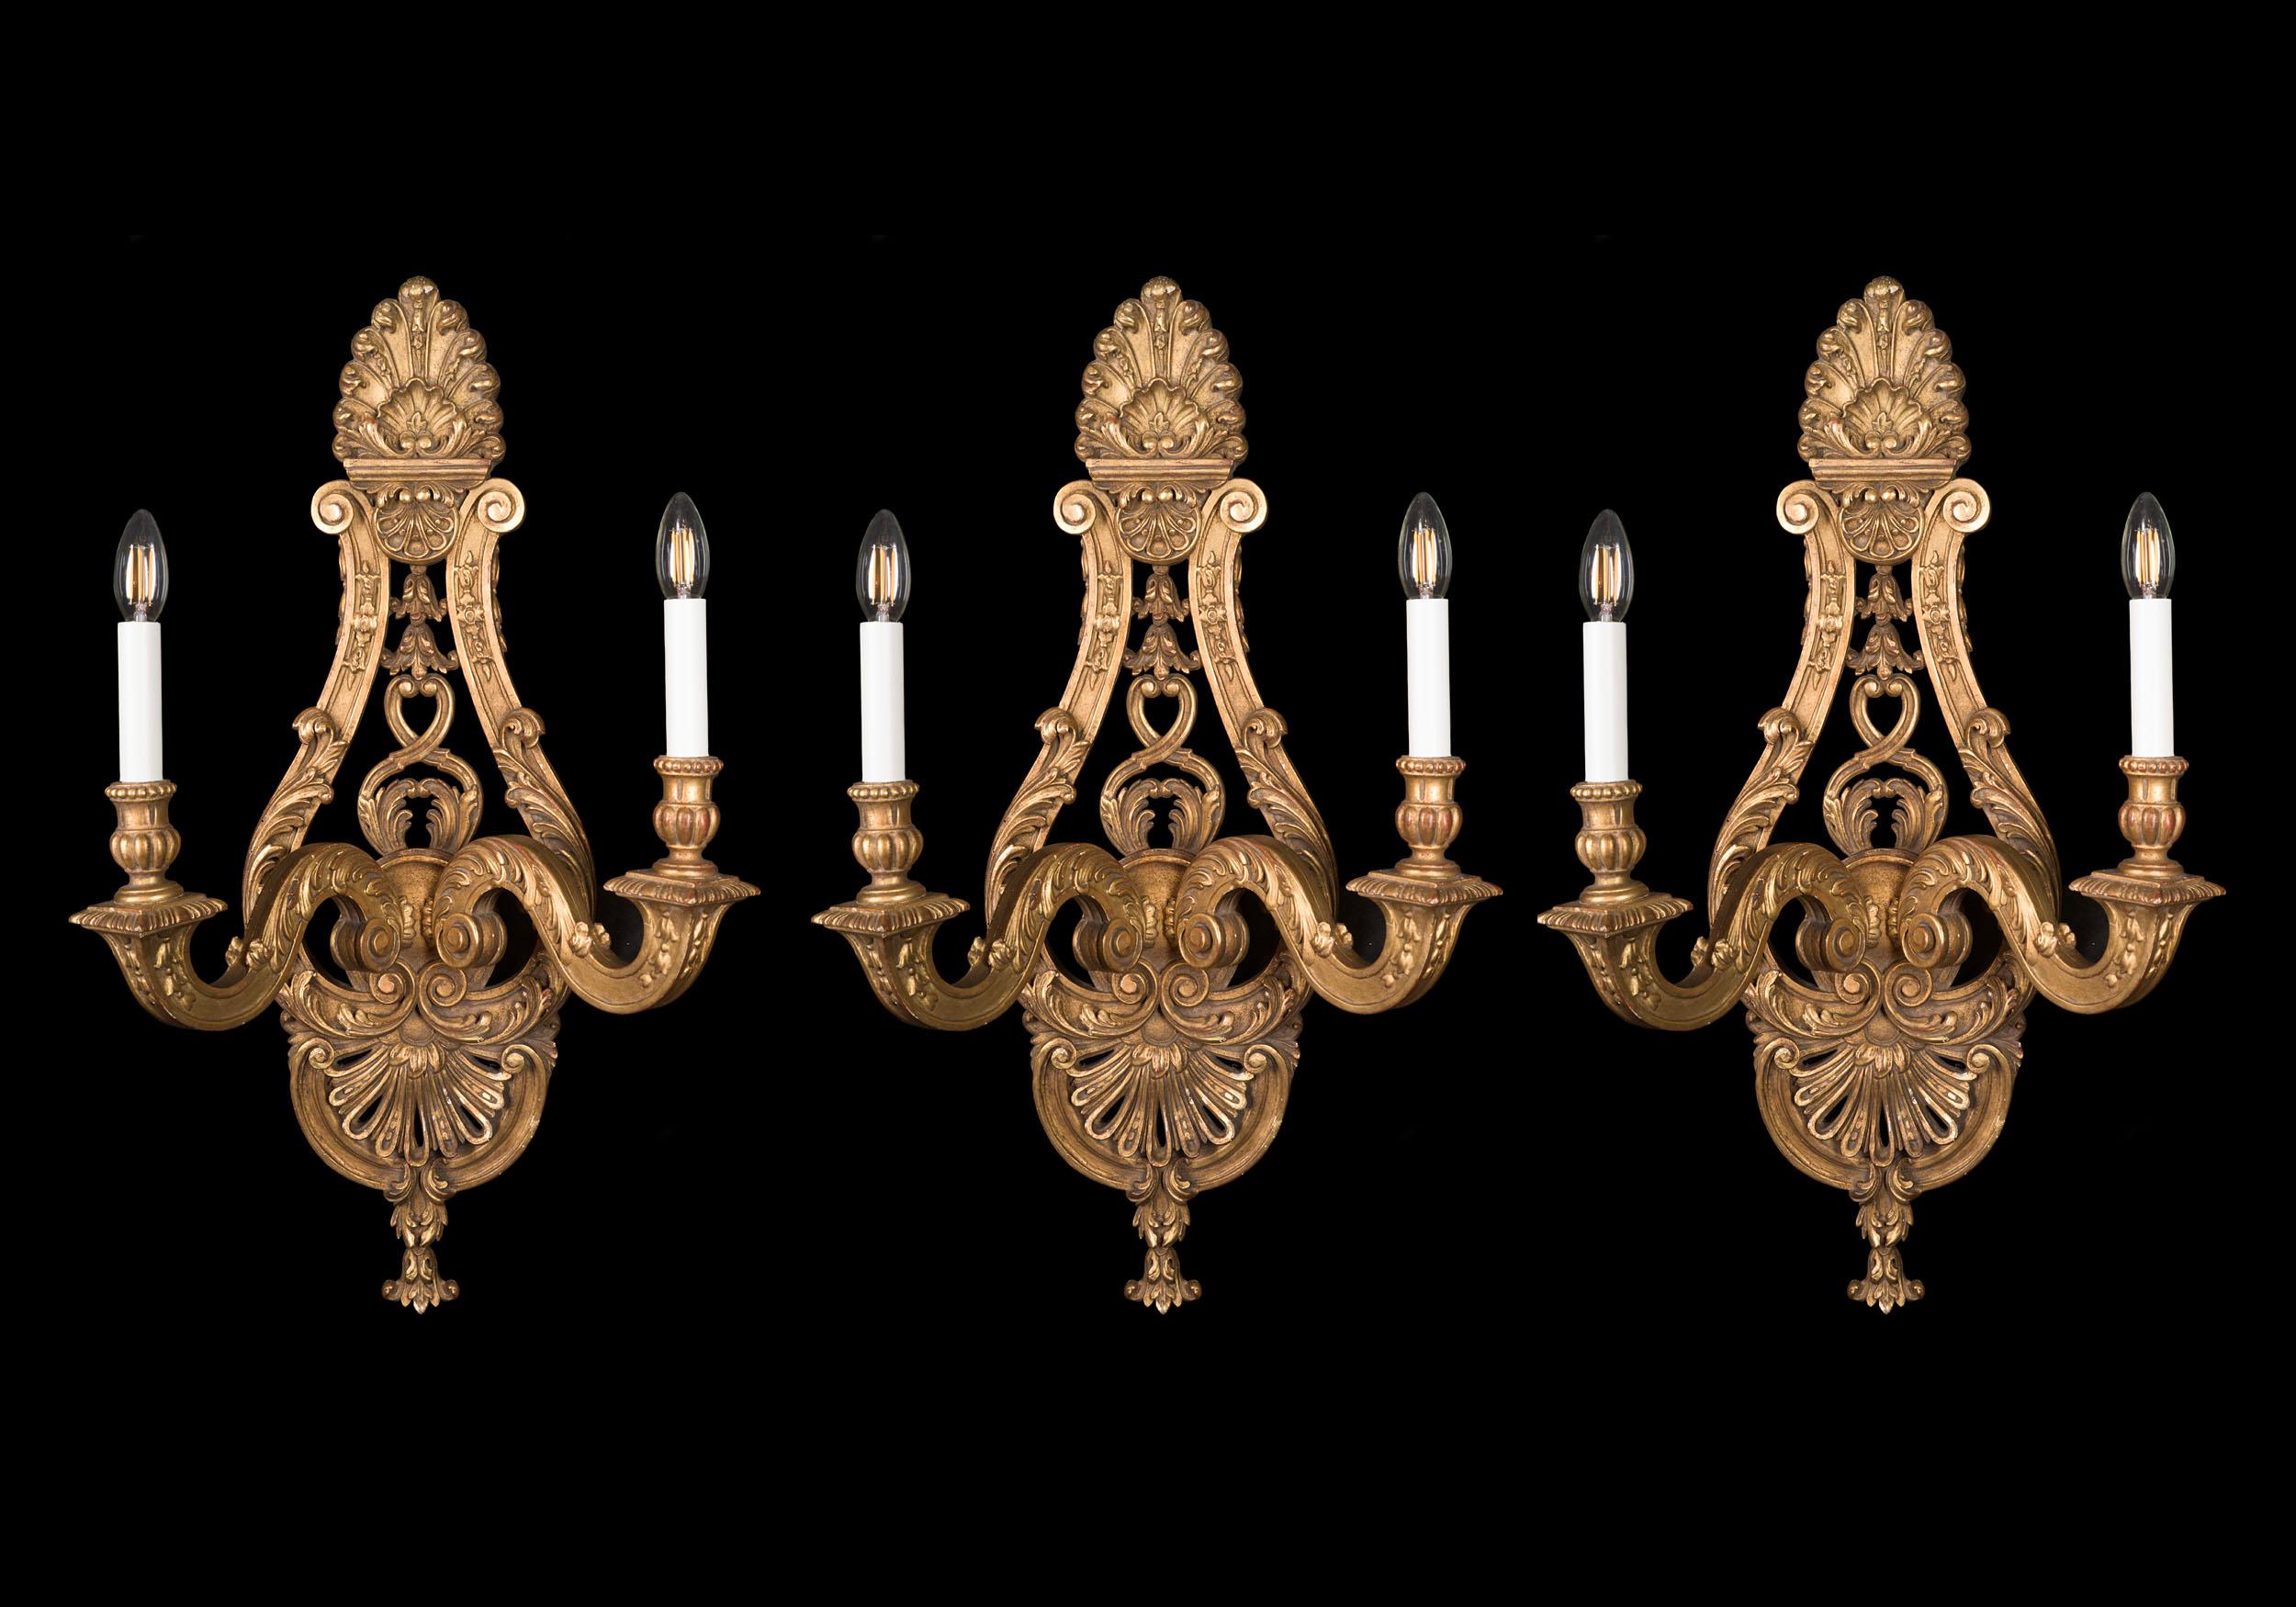 A very fine set of three large giltwood wall sconces in the Régence style, ornately carved with foliate flourishes and palmettes, and swan neck twin branches.

French, early 20th century.